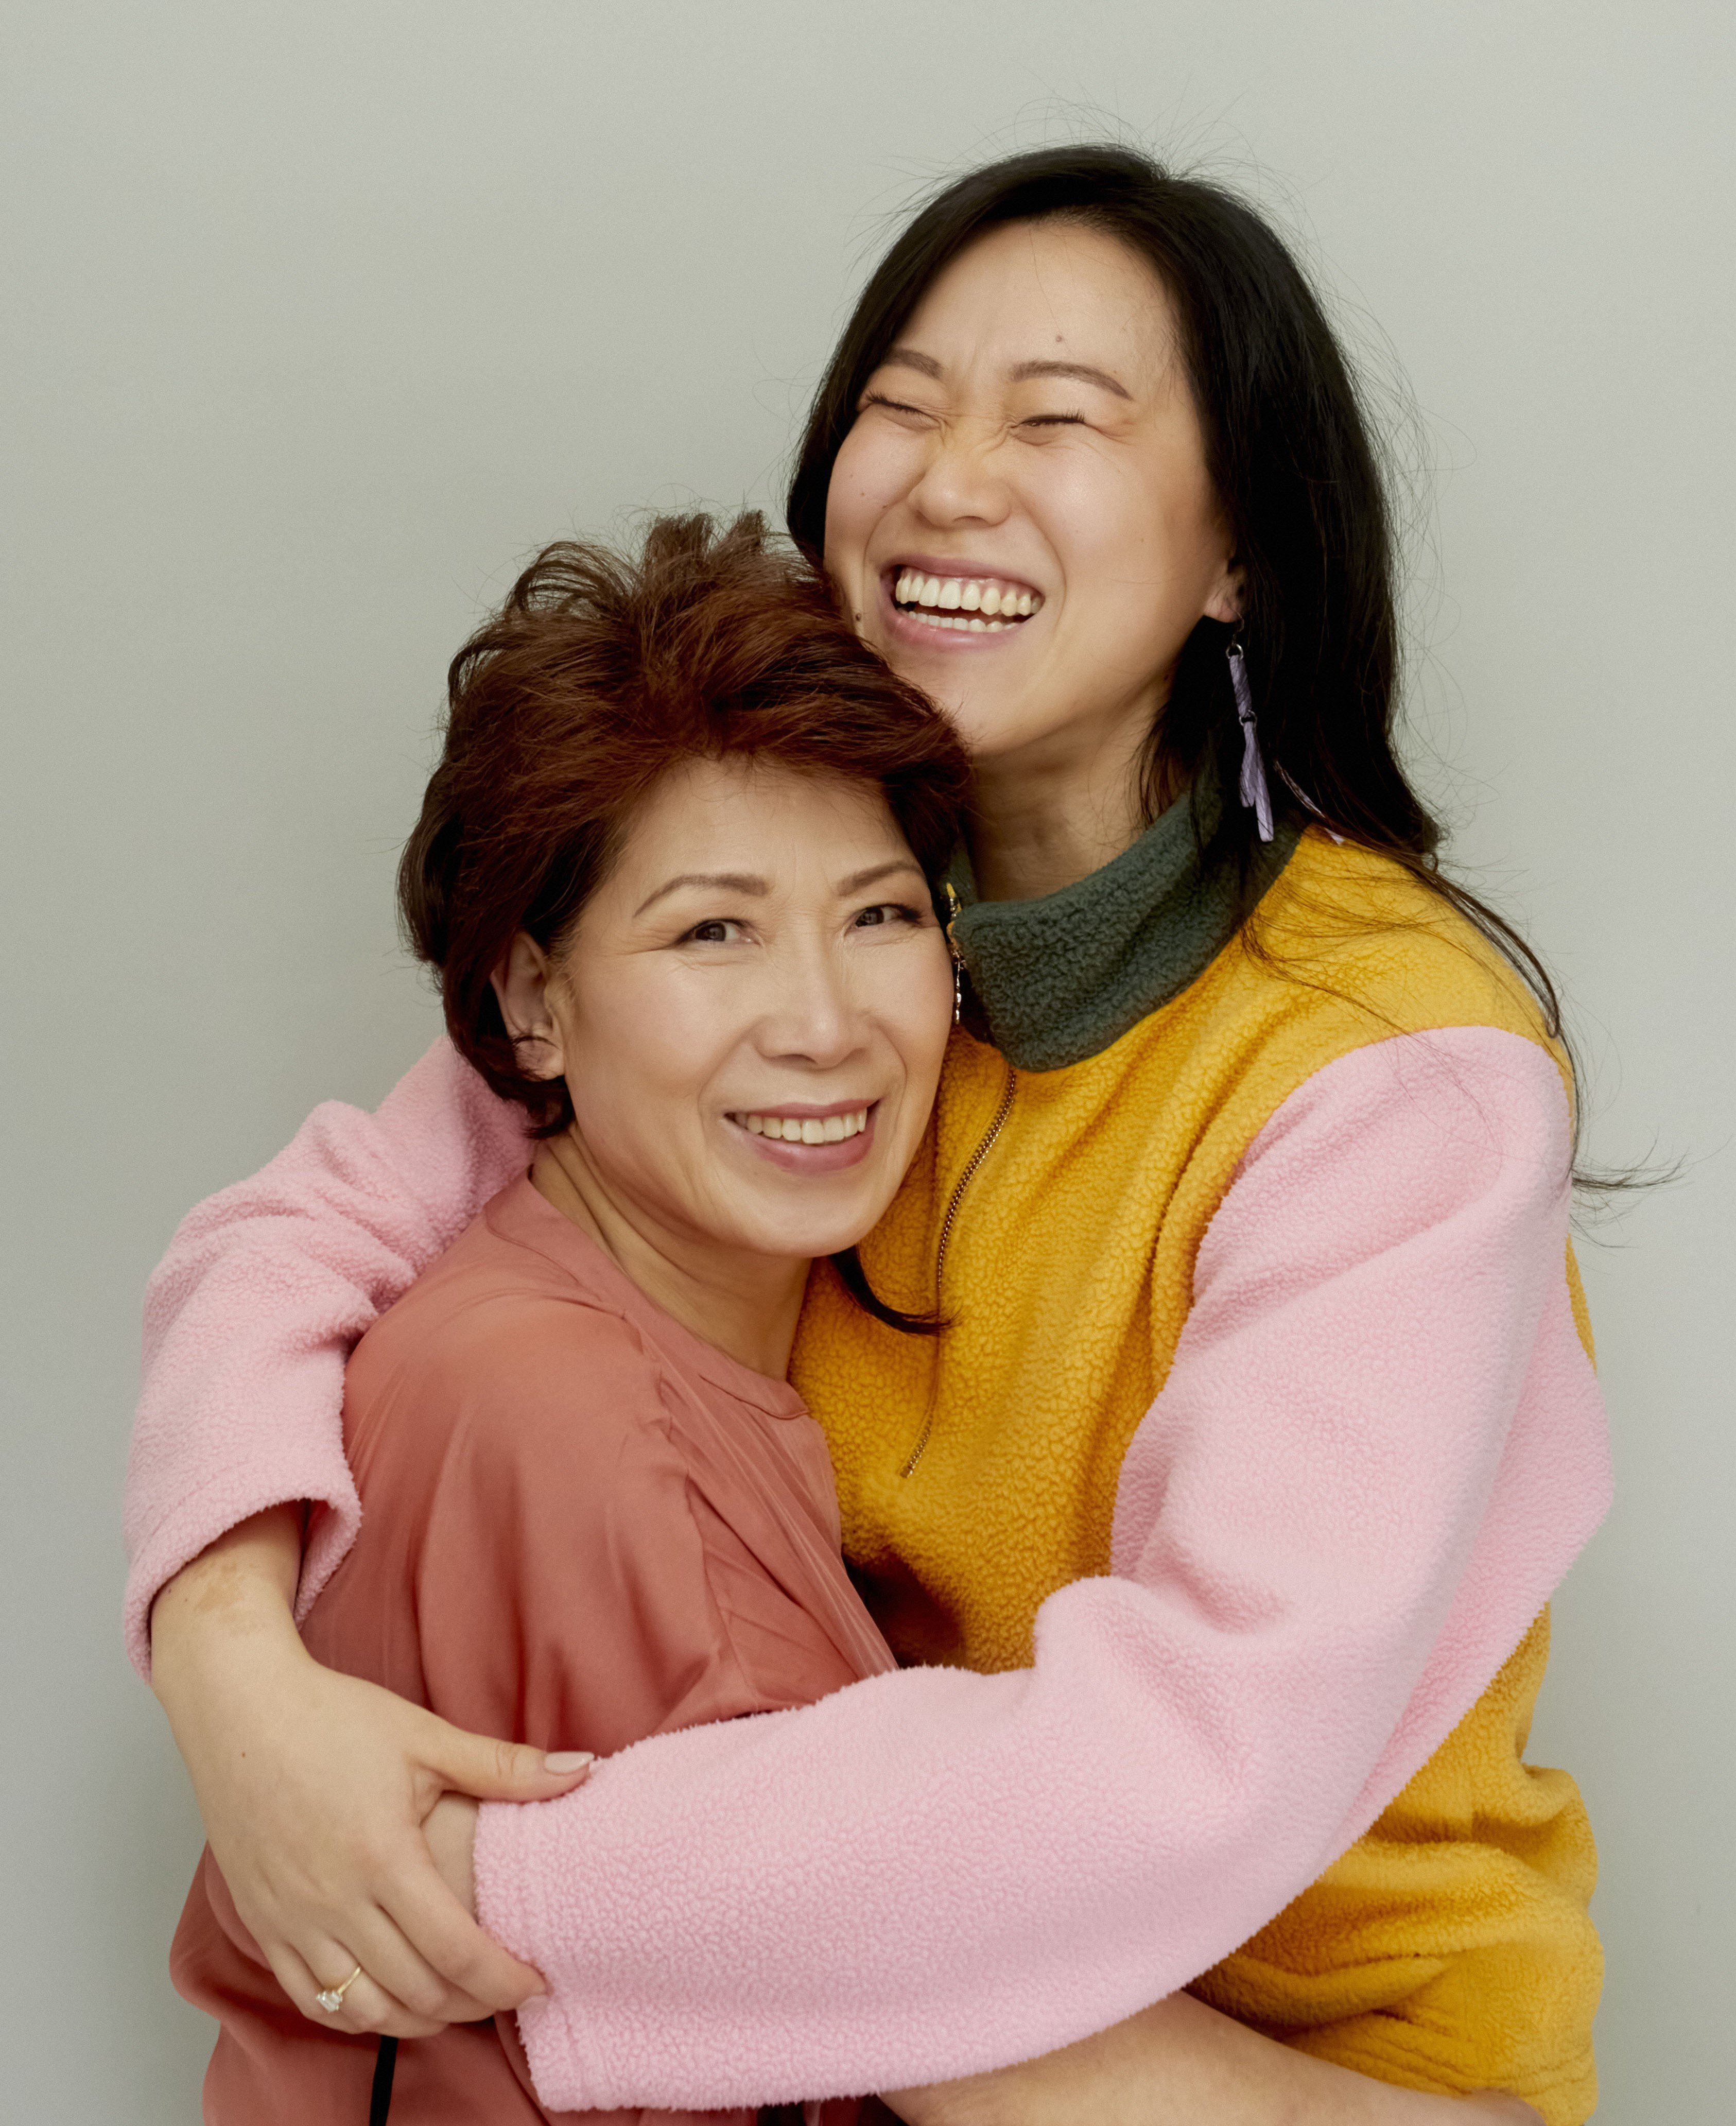 A photo of a mother and daughter embracing